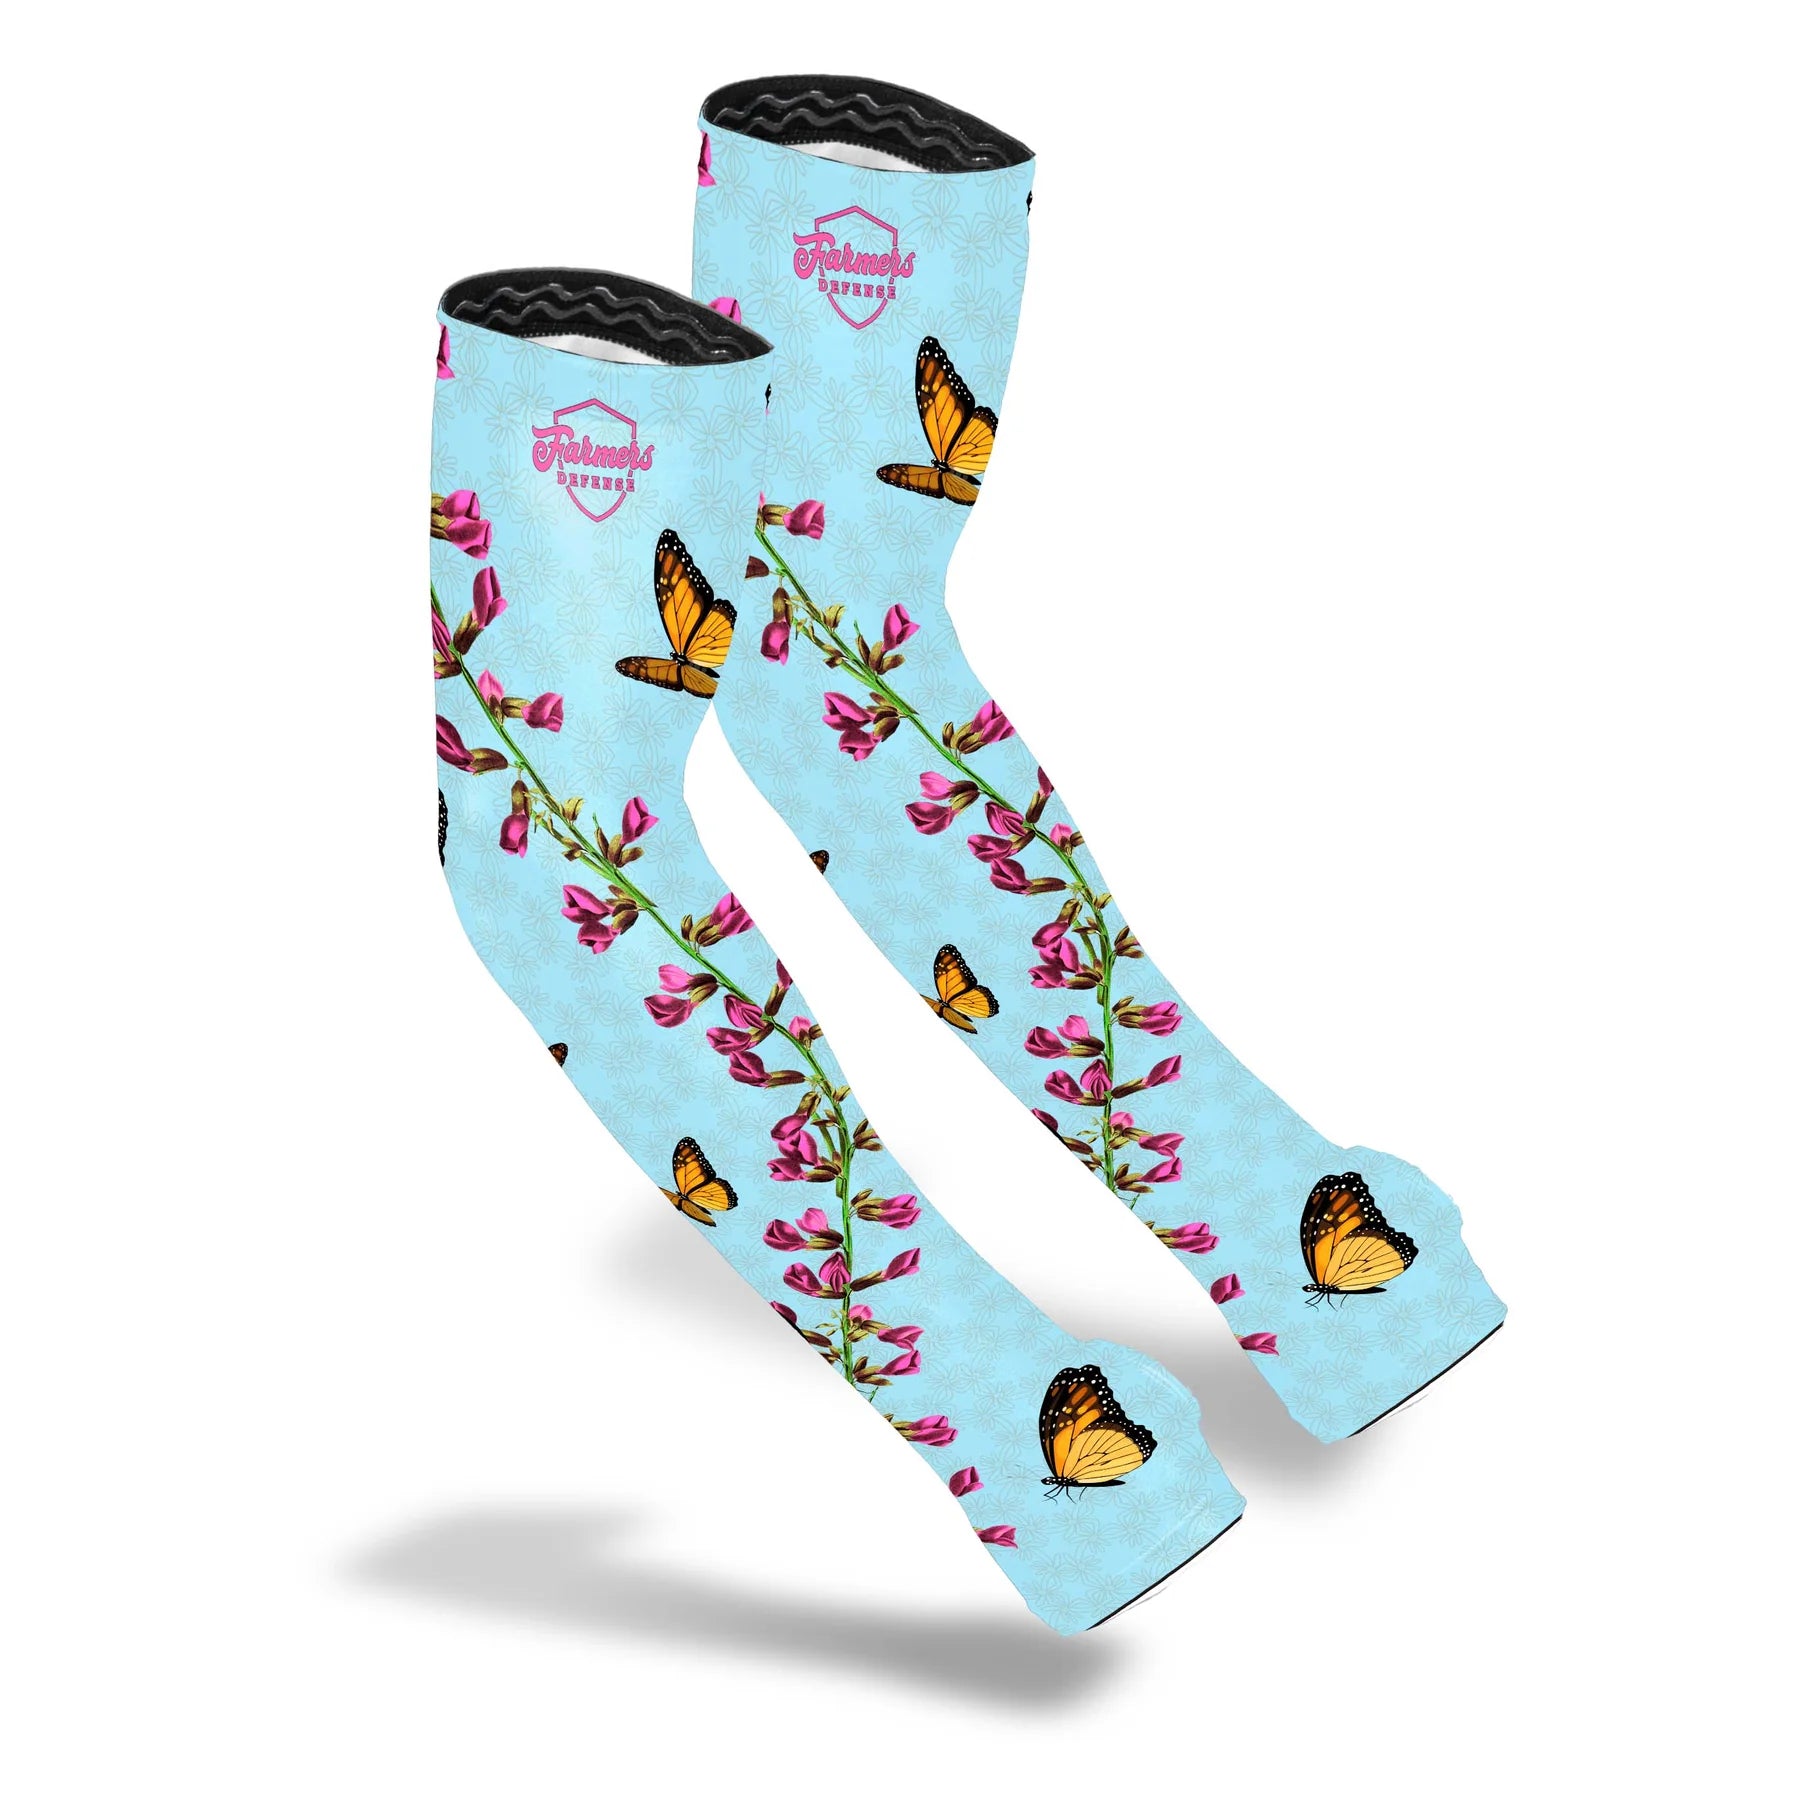 Blue gardening sleeves adorned with butterfly and flower motifs for knee protection